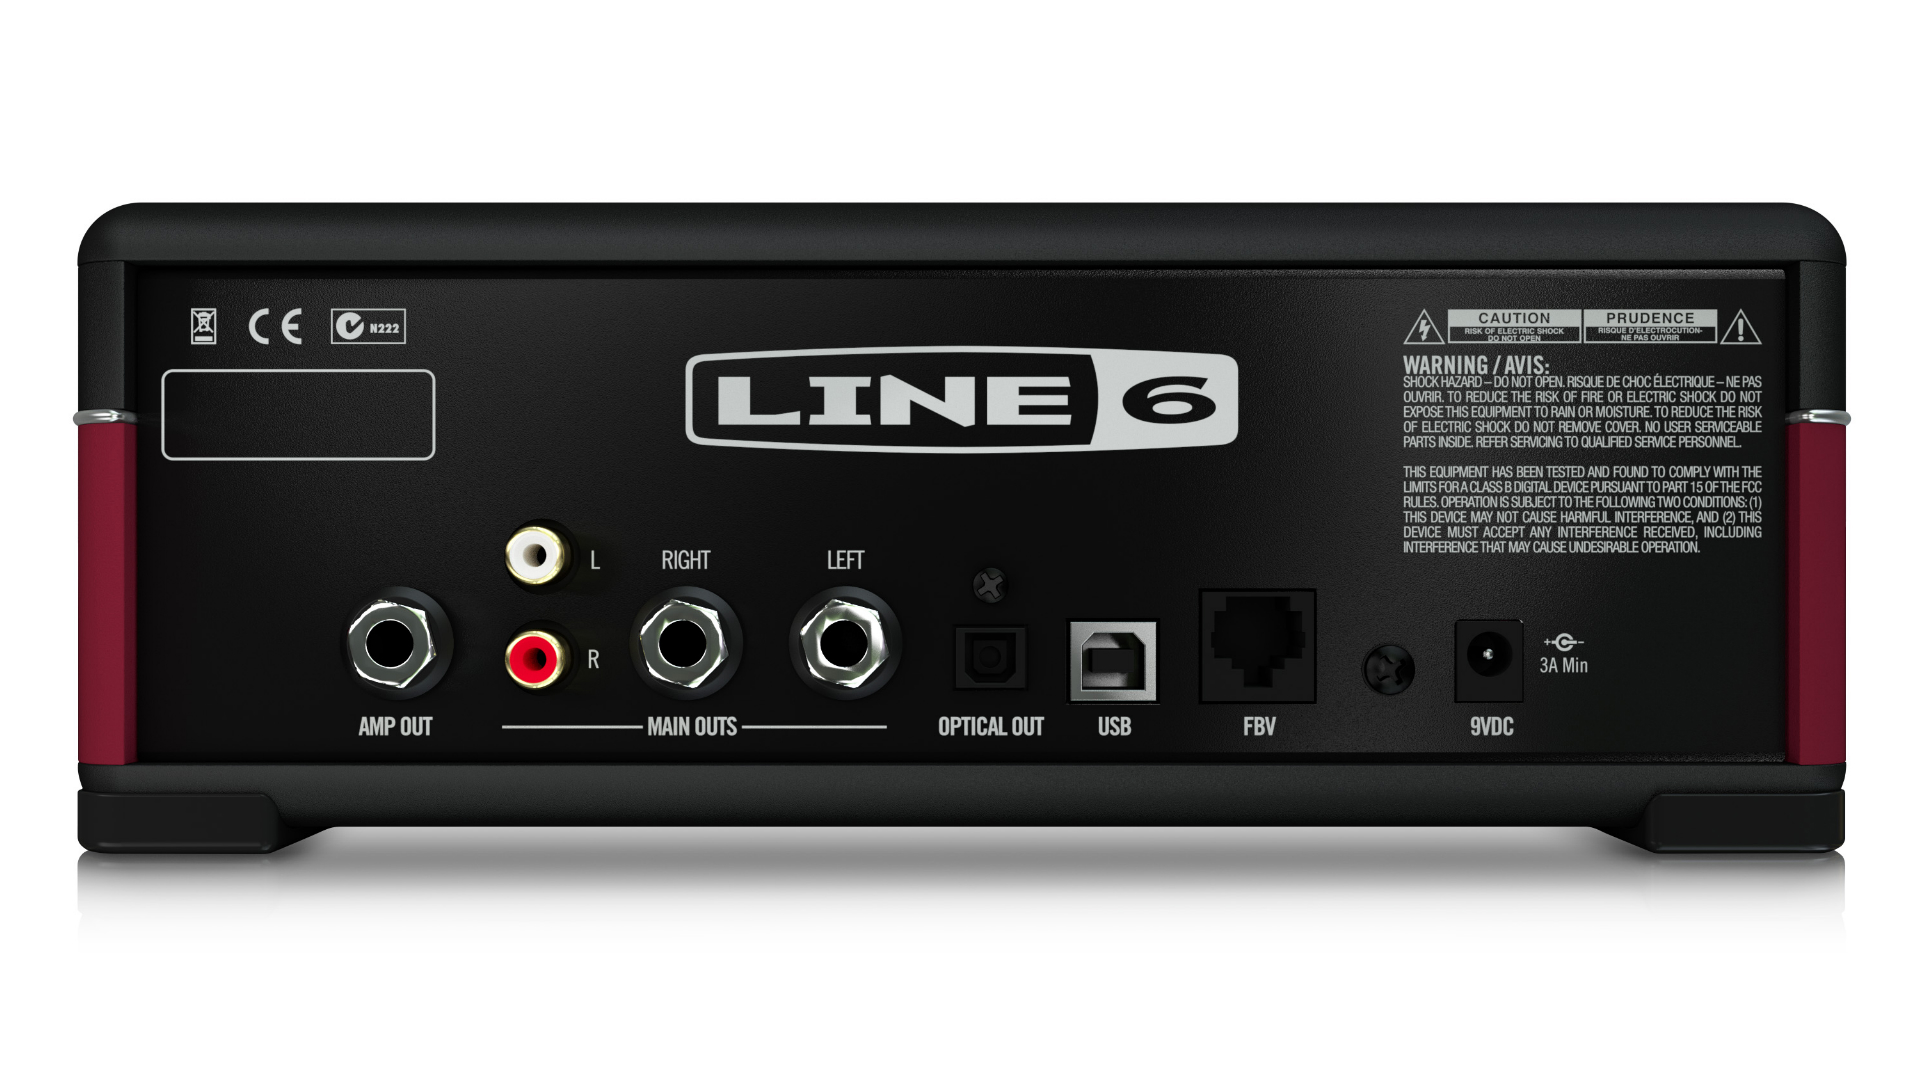 Line 6 unveils AMPLIFi TT Bluetooth guitar amp and streaming system